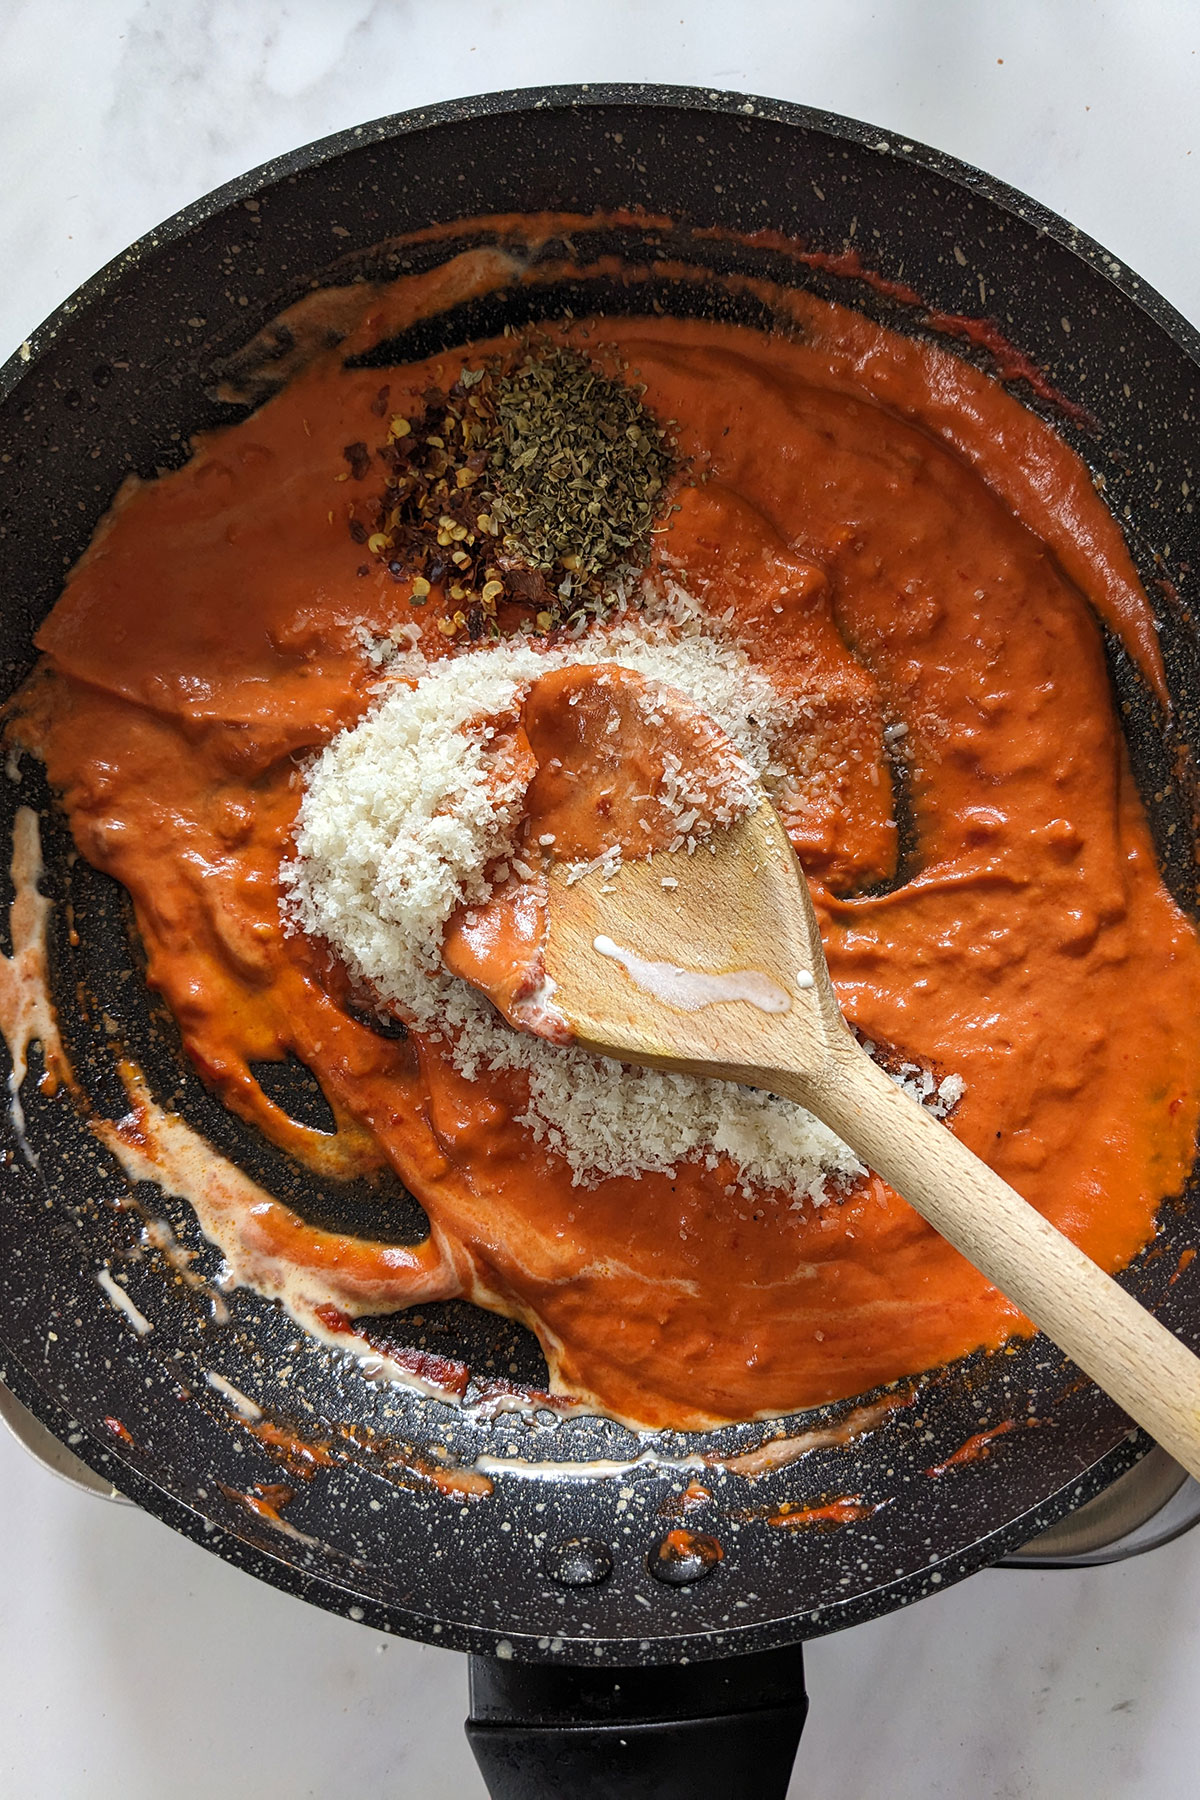 Stirring the Parmesan, red pepper flakes, oregano, salt, and pepper with a wooden spoon in a dark coloured frying pan.